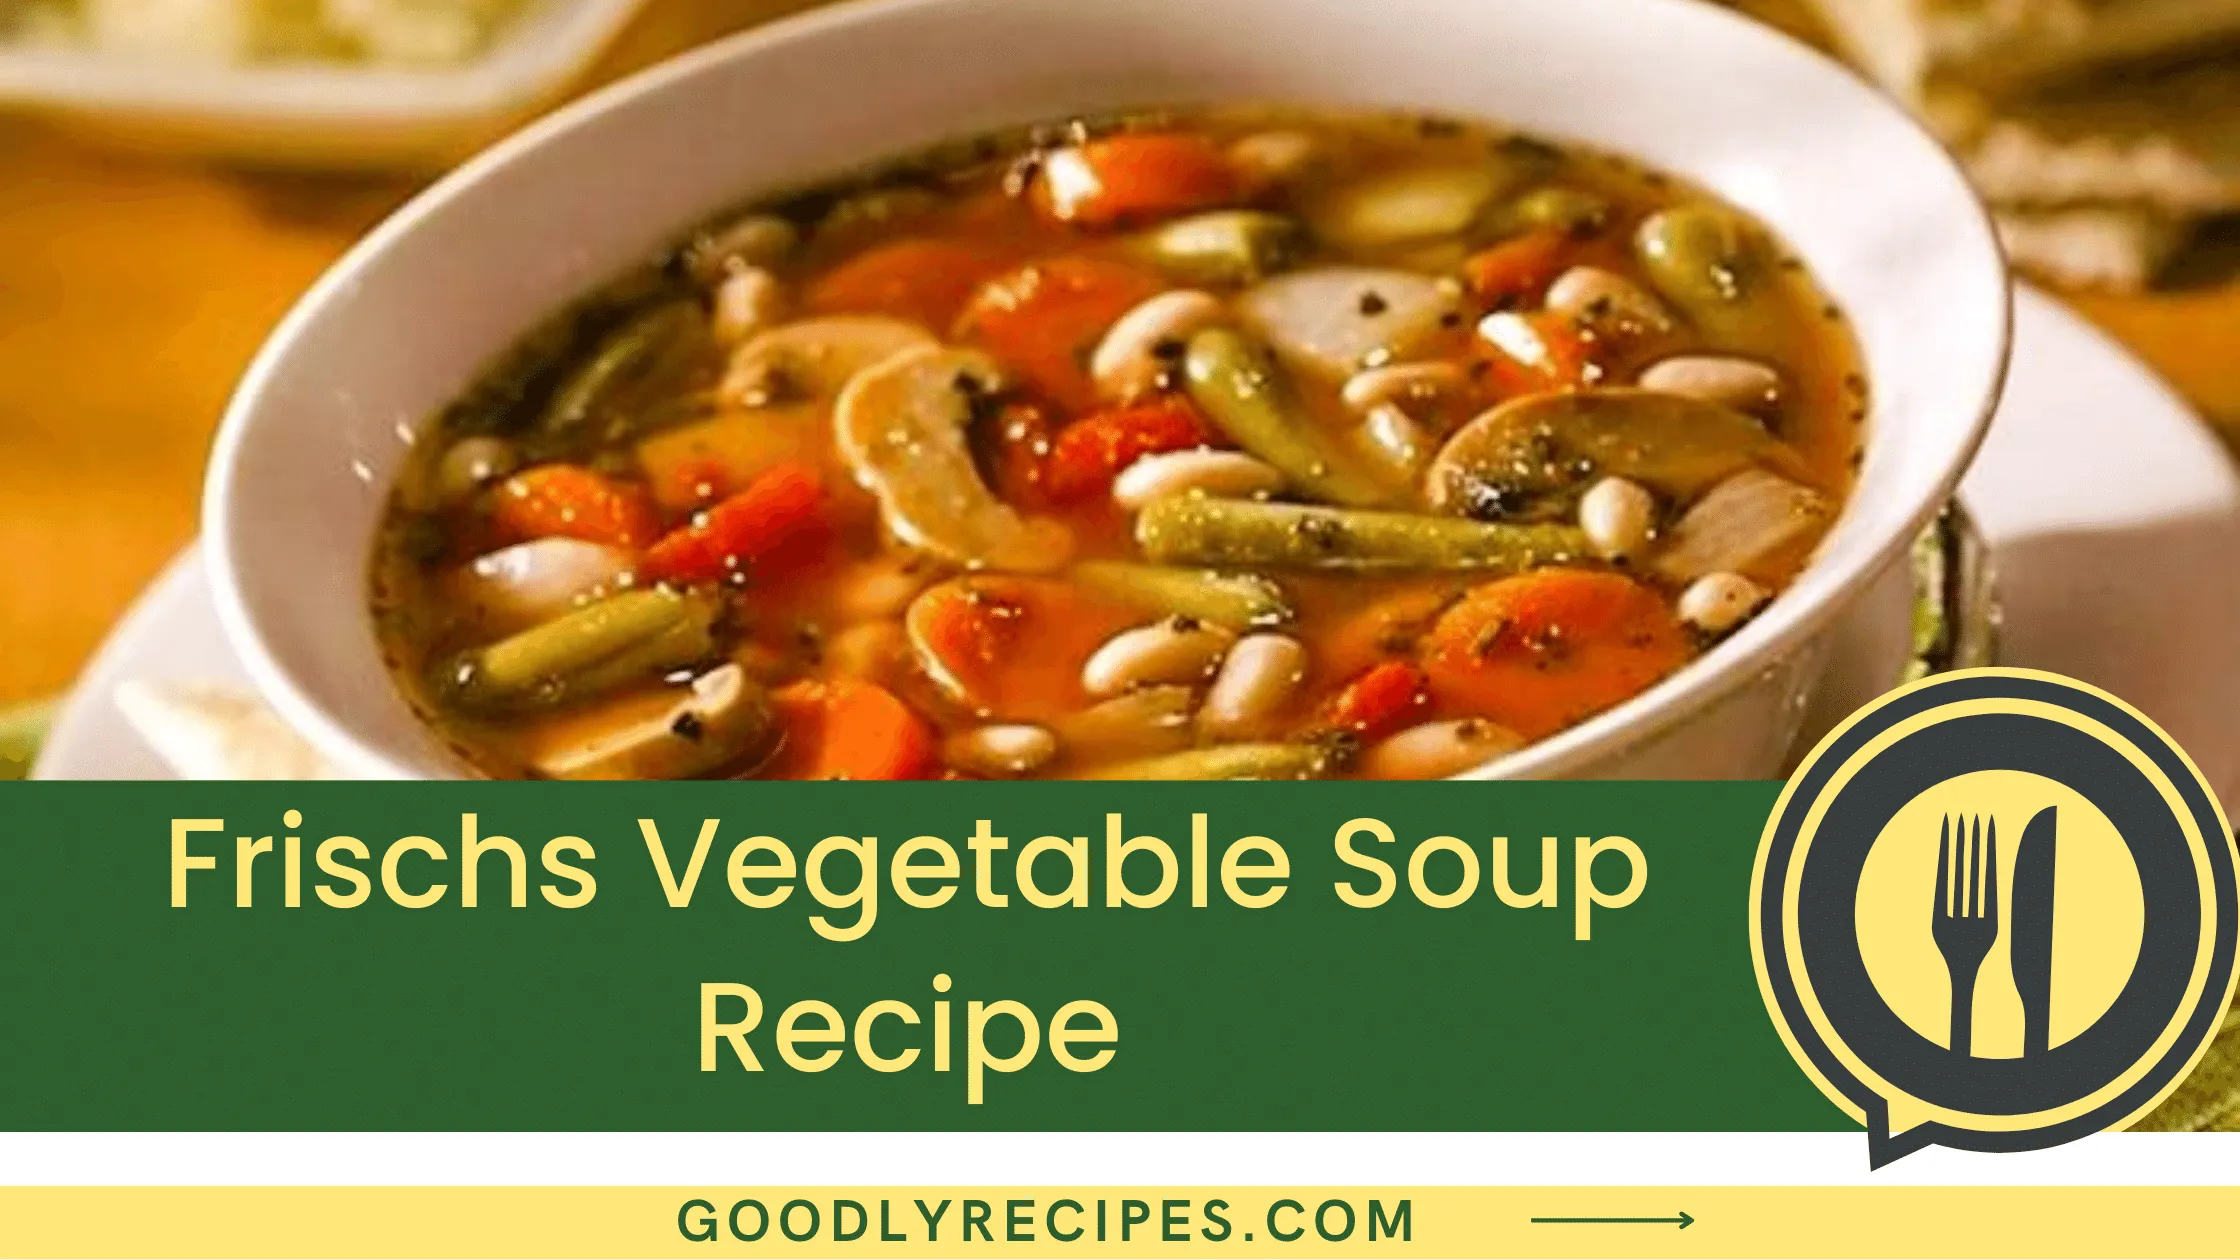 Frisch's Vegetable Soup Recipe - For Food Lovers